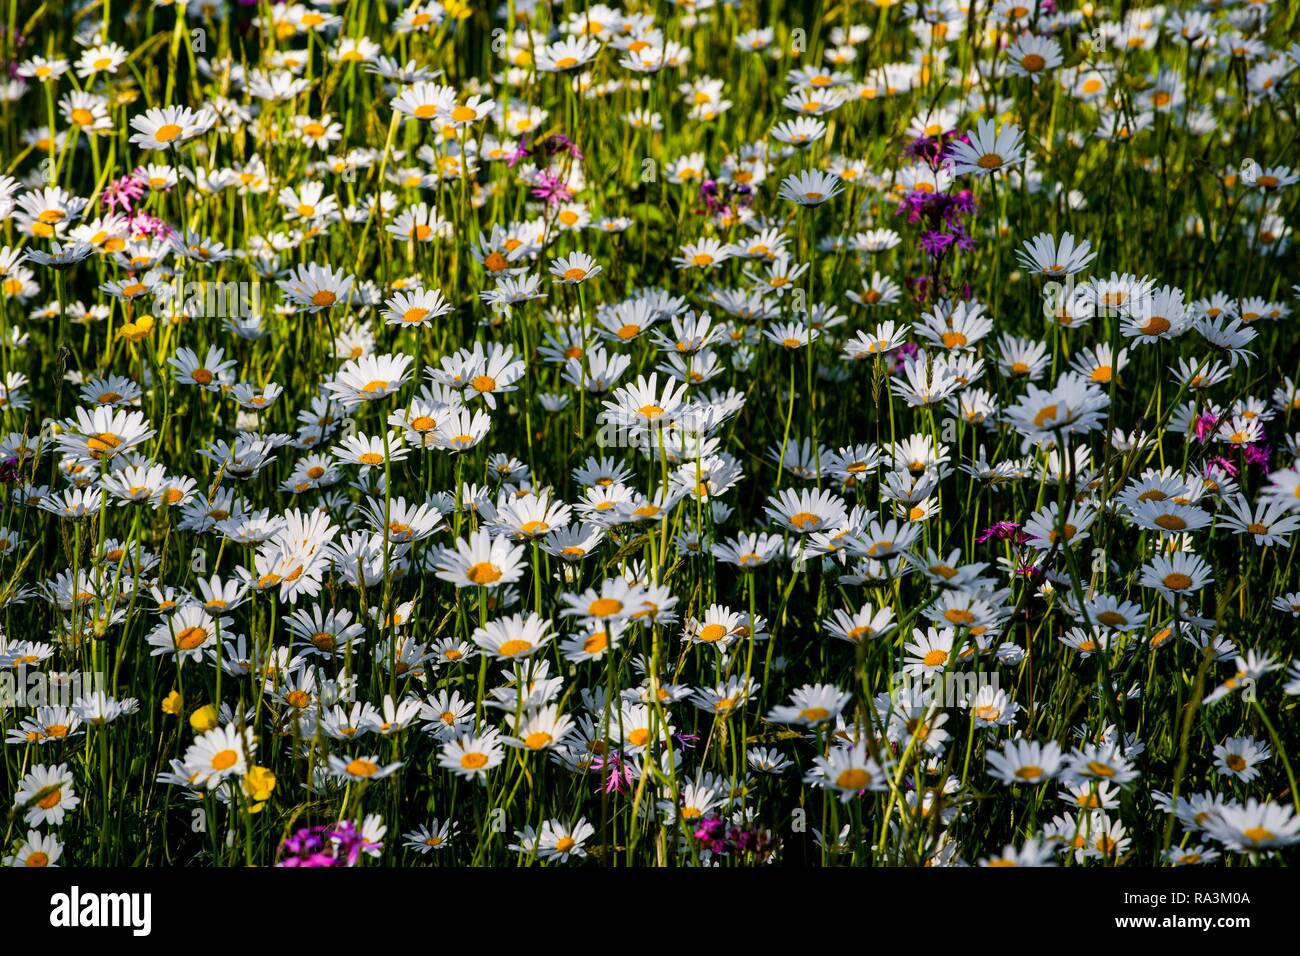 Sea of blossoms, wild flowers on a meadow, ox-eye daisies (Leucanthemum vulgare), Ragged Robin (Lychnis flos-cuculi), Quebec Stock Photo